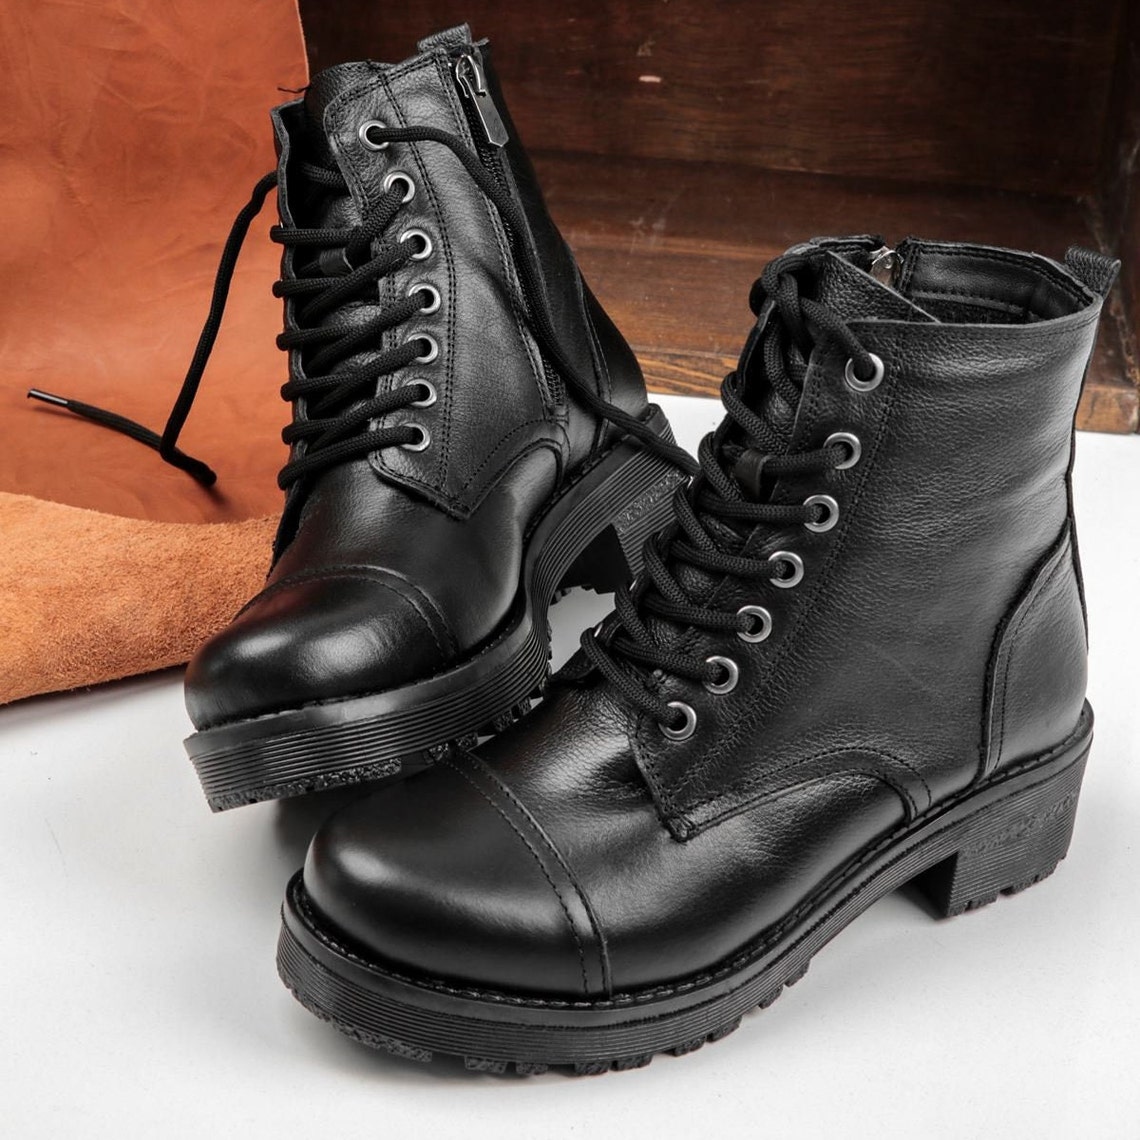 Handmade Zipper and Lace up Geniune Leather Combat Boots - Etsy